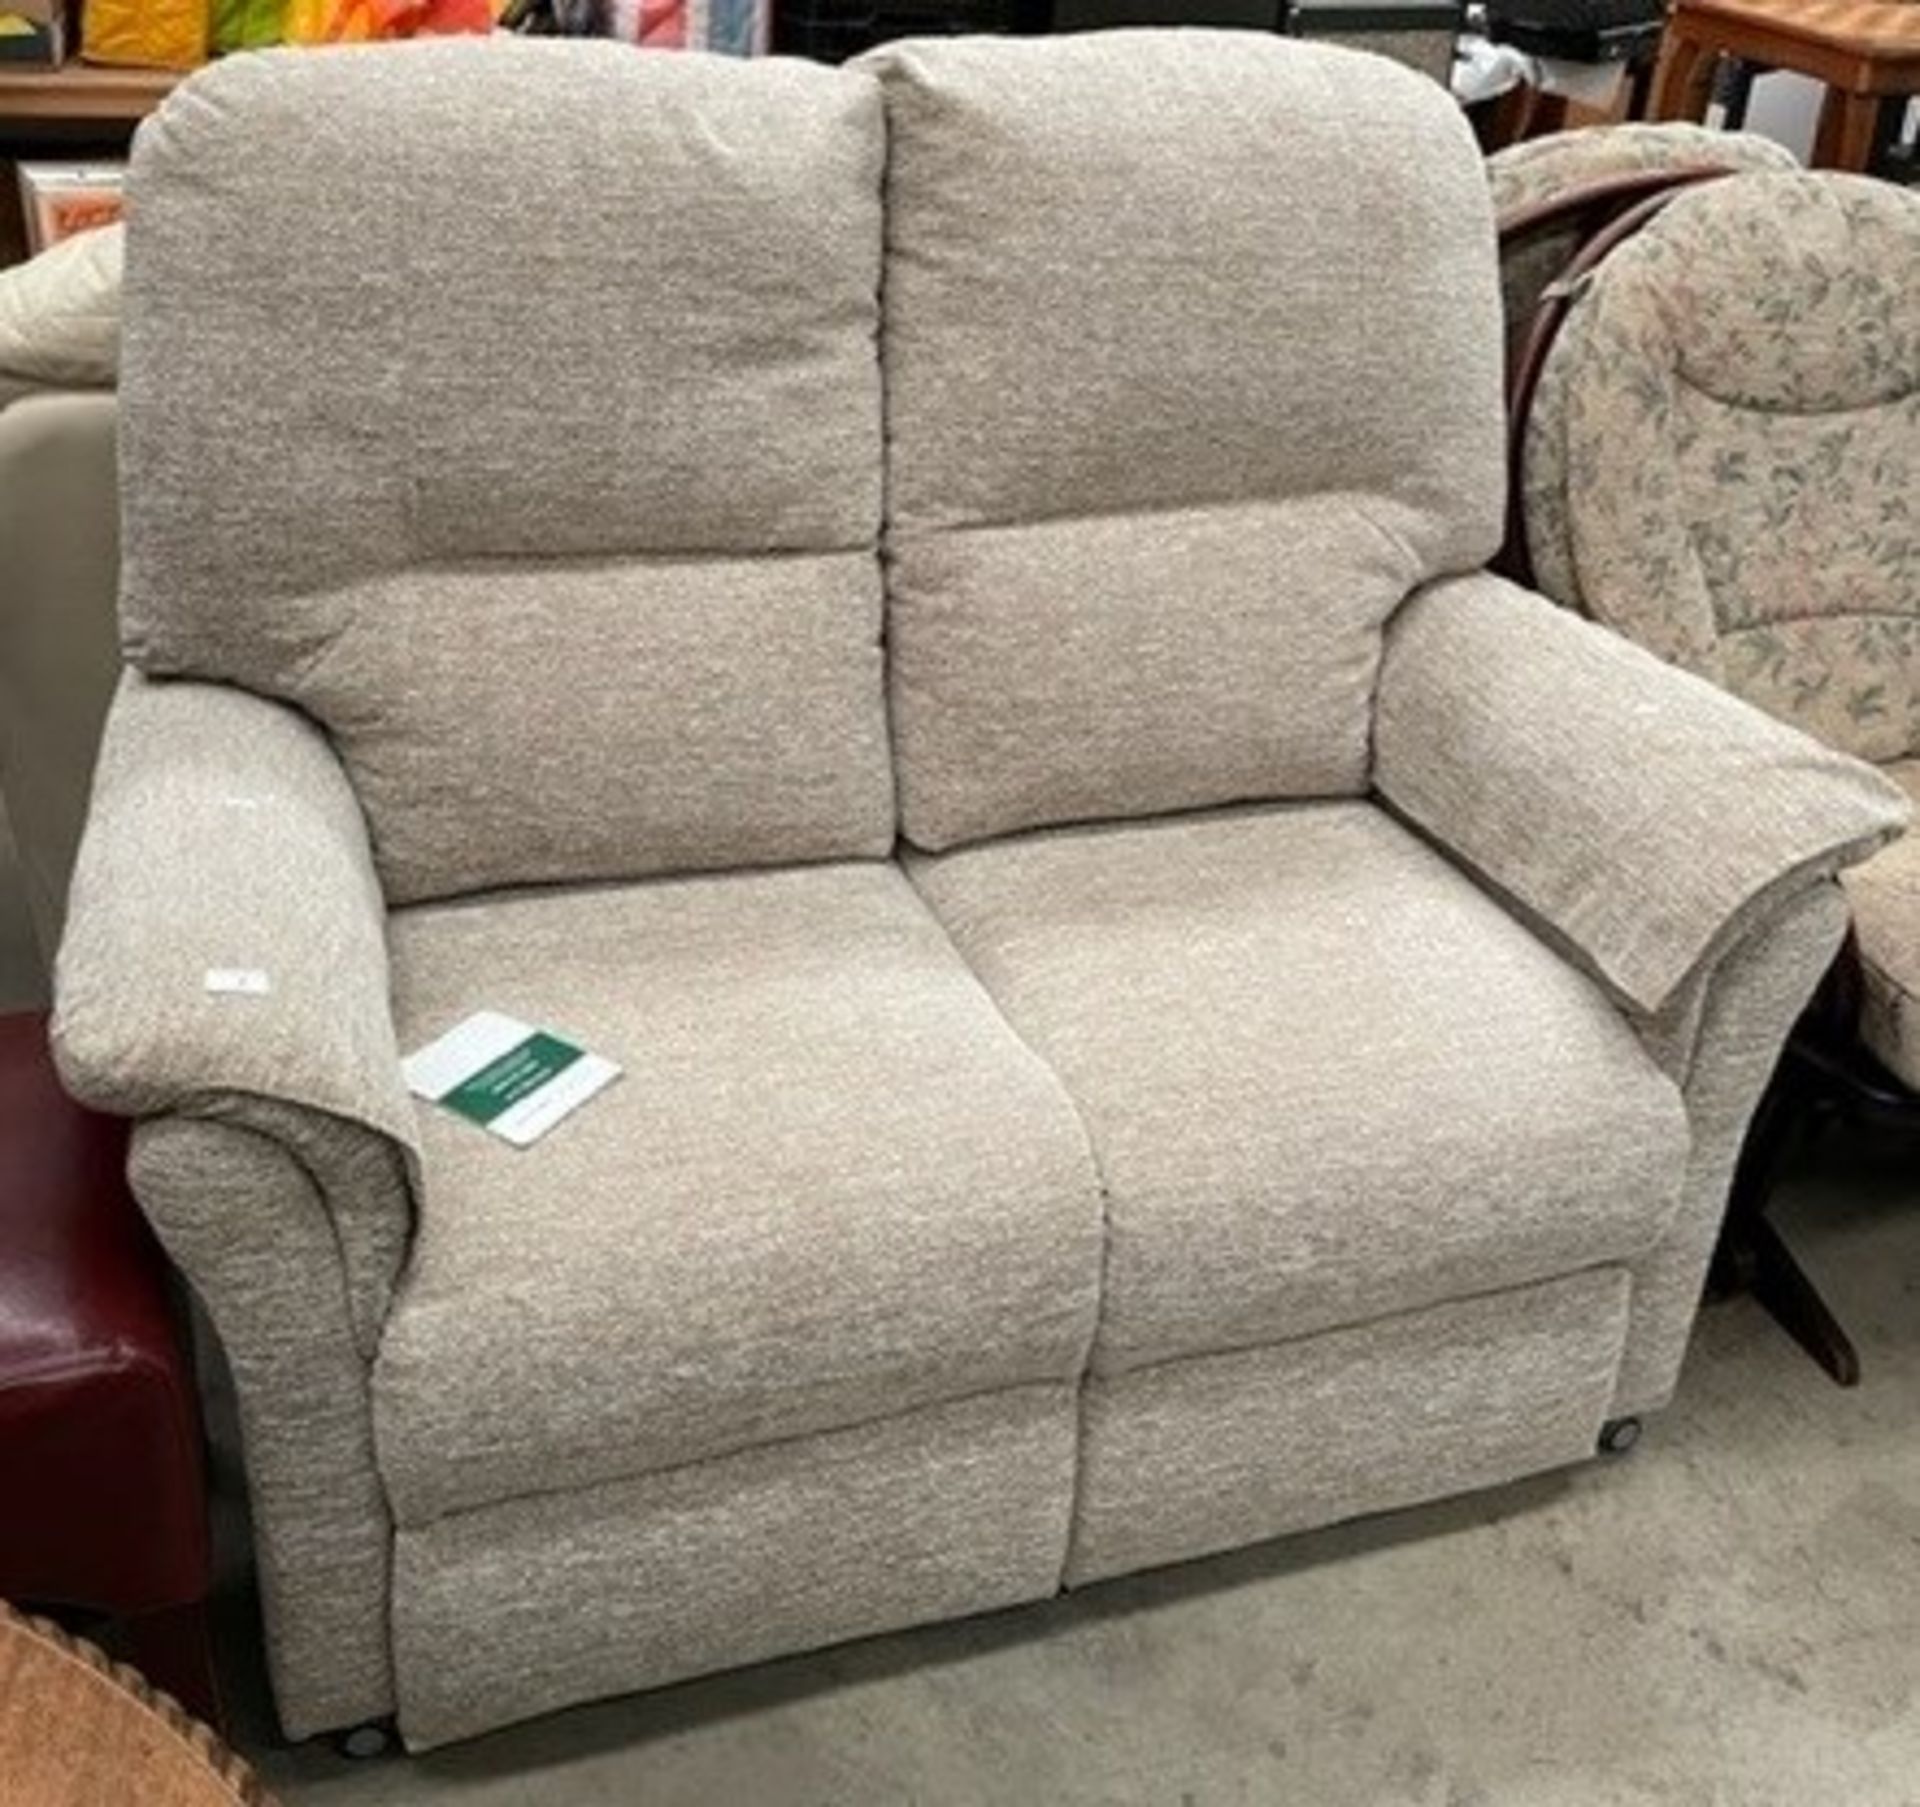 An Oaktree mobility oatmeal upholstered two seater settee